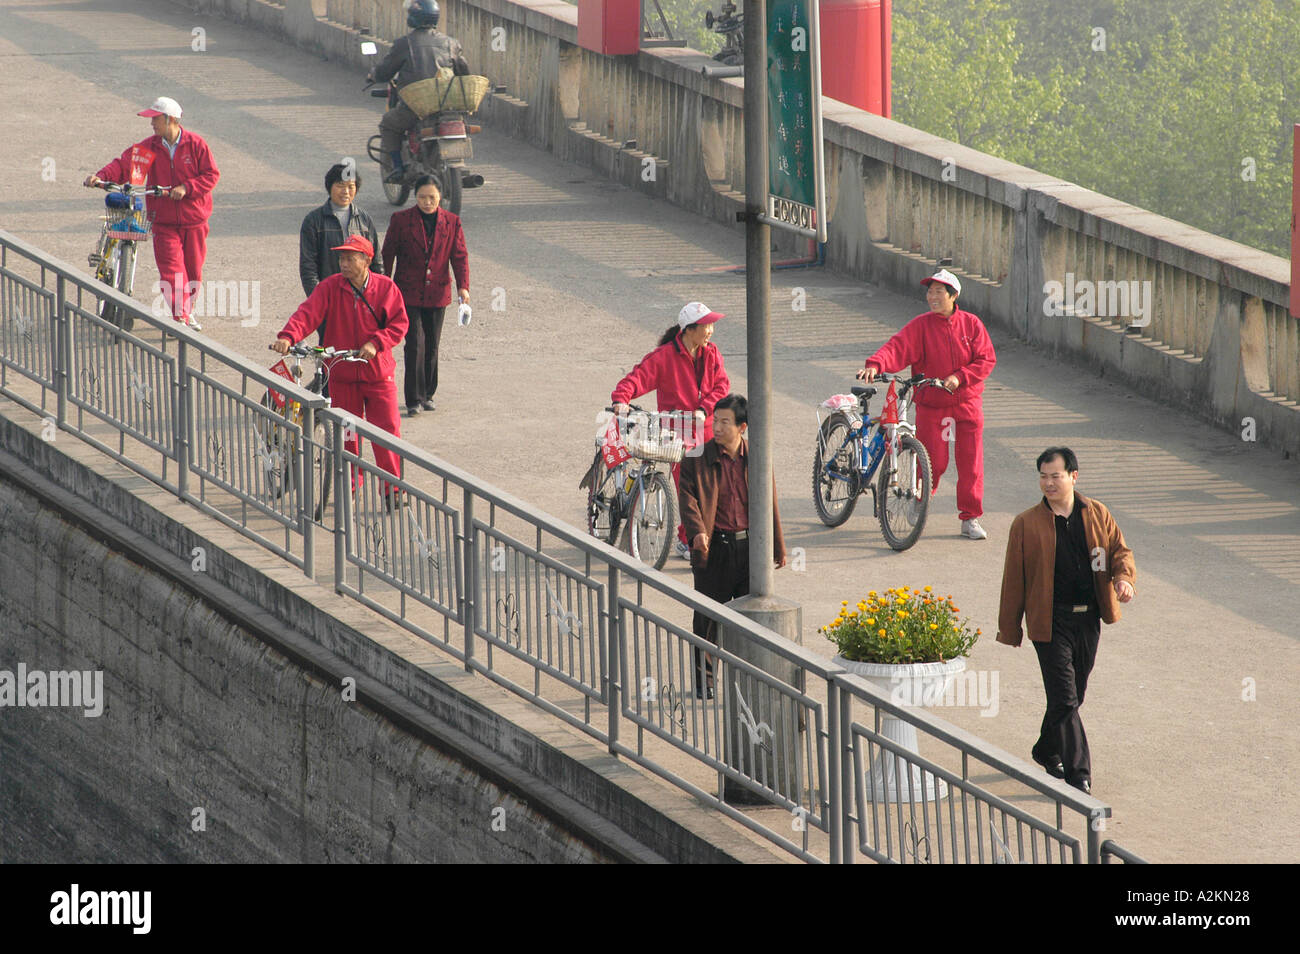 workers riding bycicles and pedestrians crossing a bridge Stock Photo